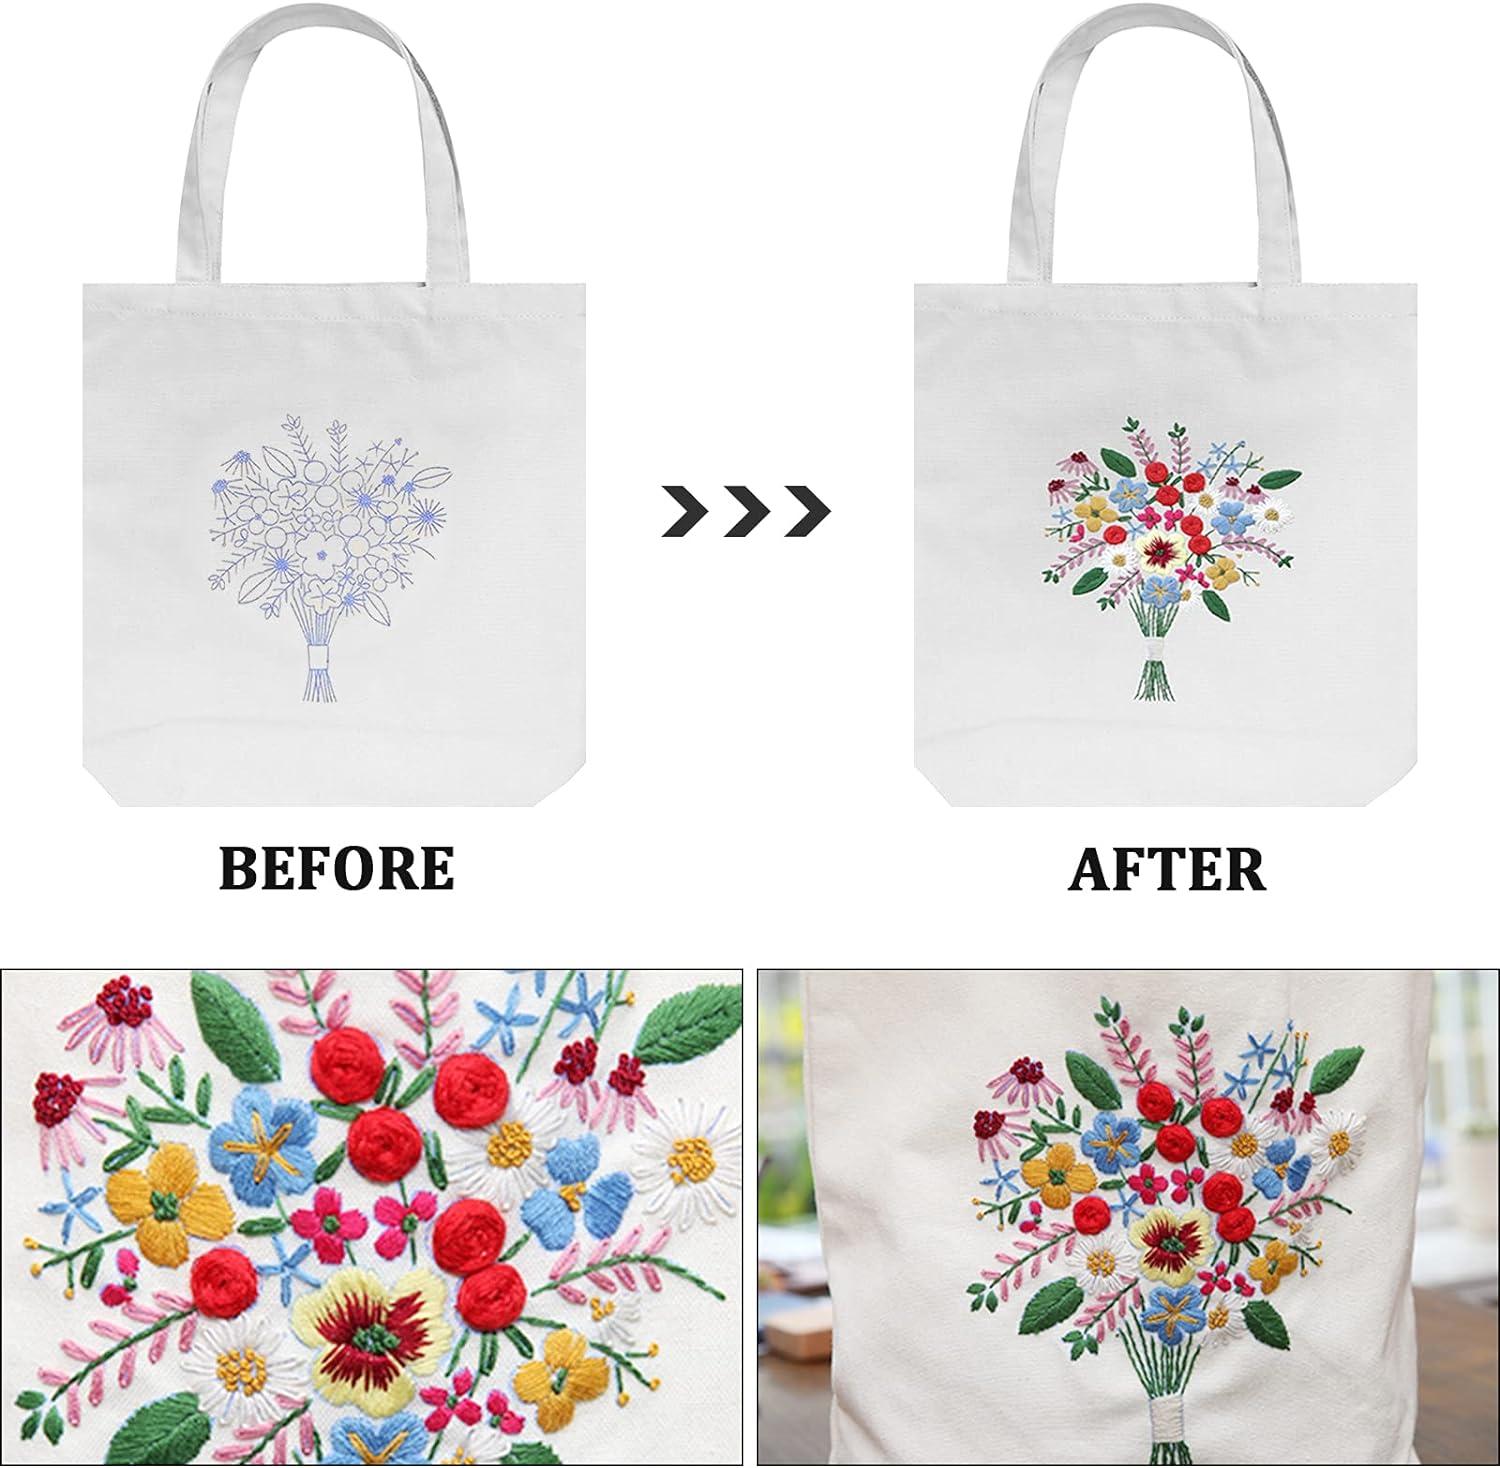 How To Cross Stitch On A Tote Bag